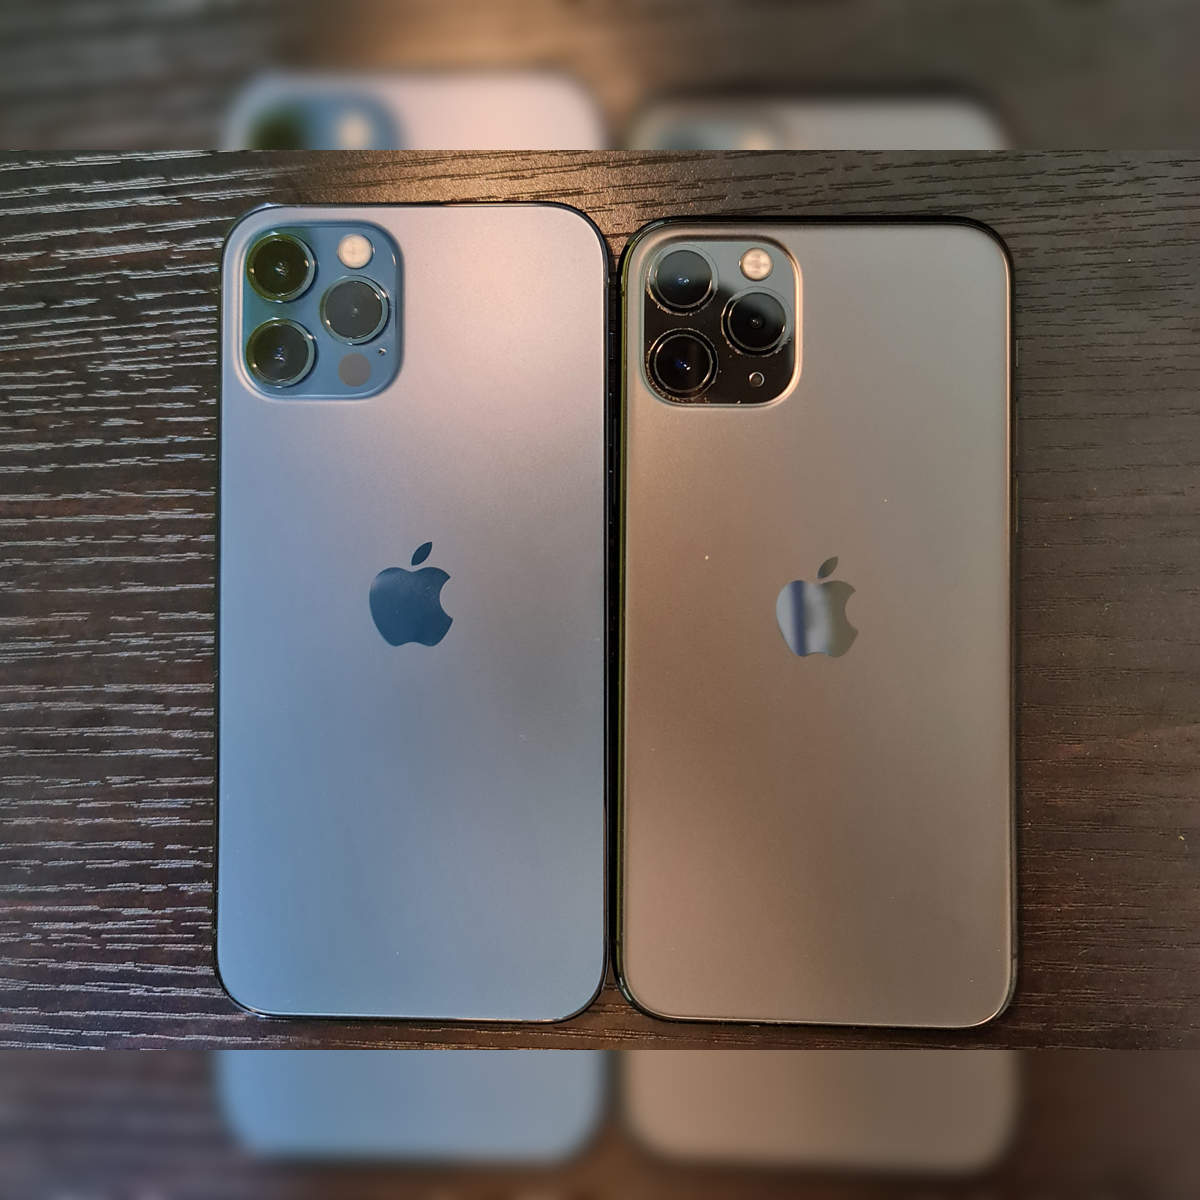 iPhone 13 Pro case on an iPhone 12 Pro shows a huge size difference in  camera module - India Today